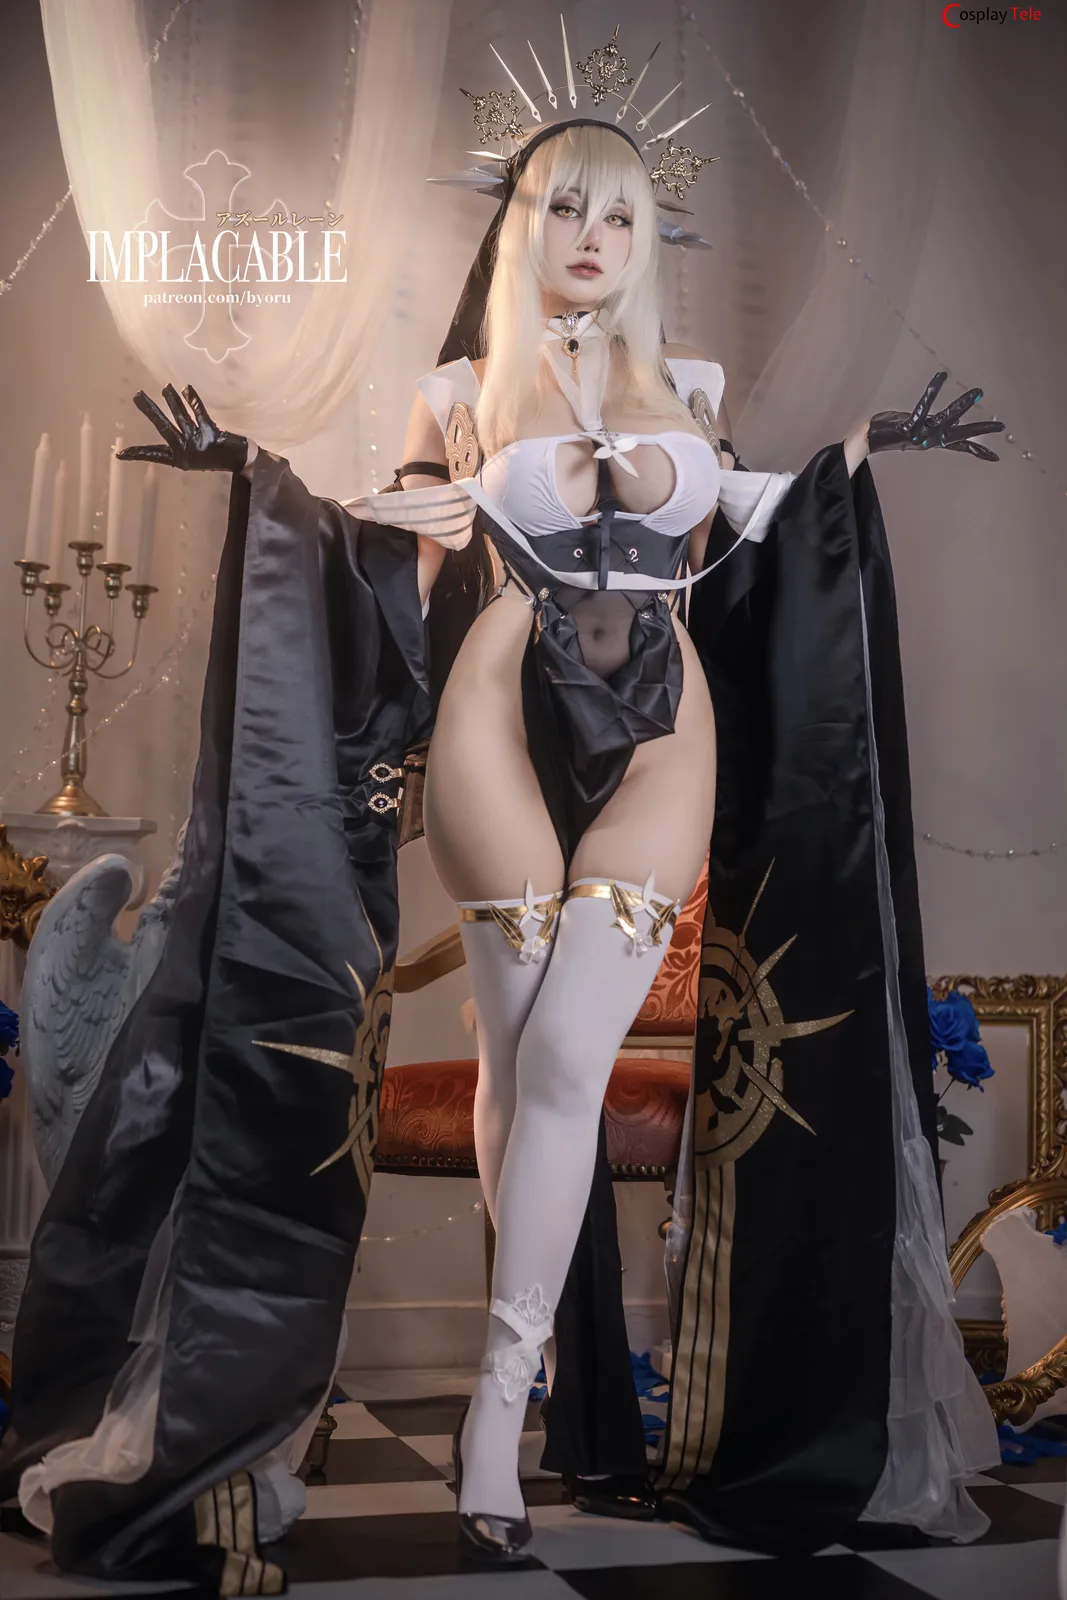 Byoru (ビョル) cosplay Implacable – Azur Lane “57 photos and 10 videos” 569